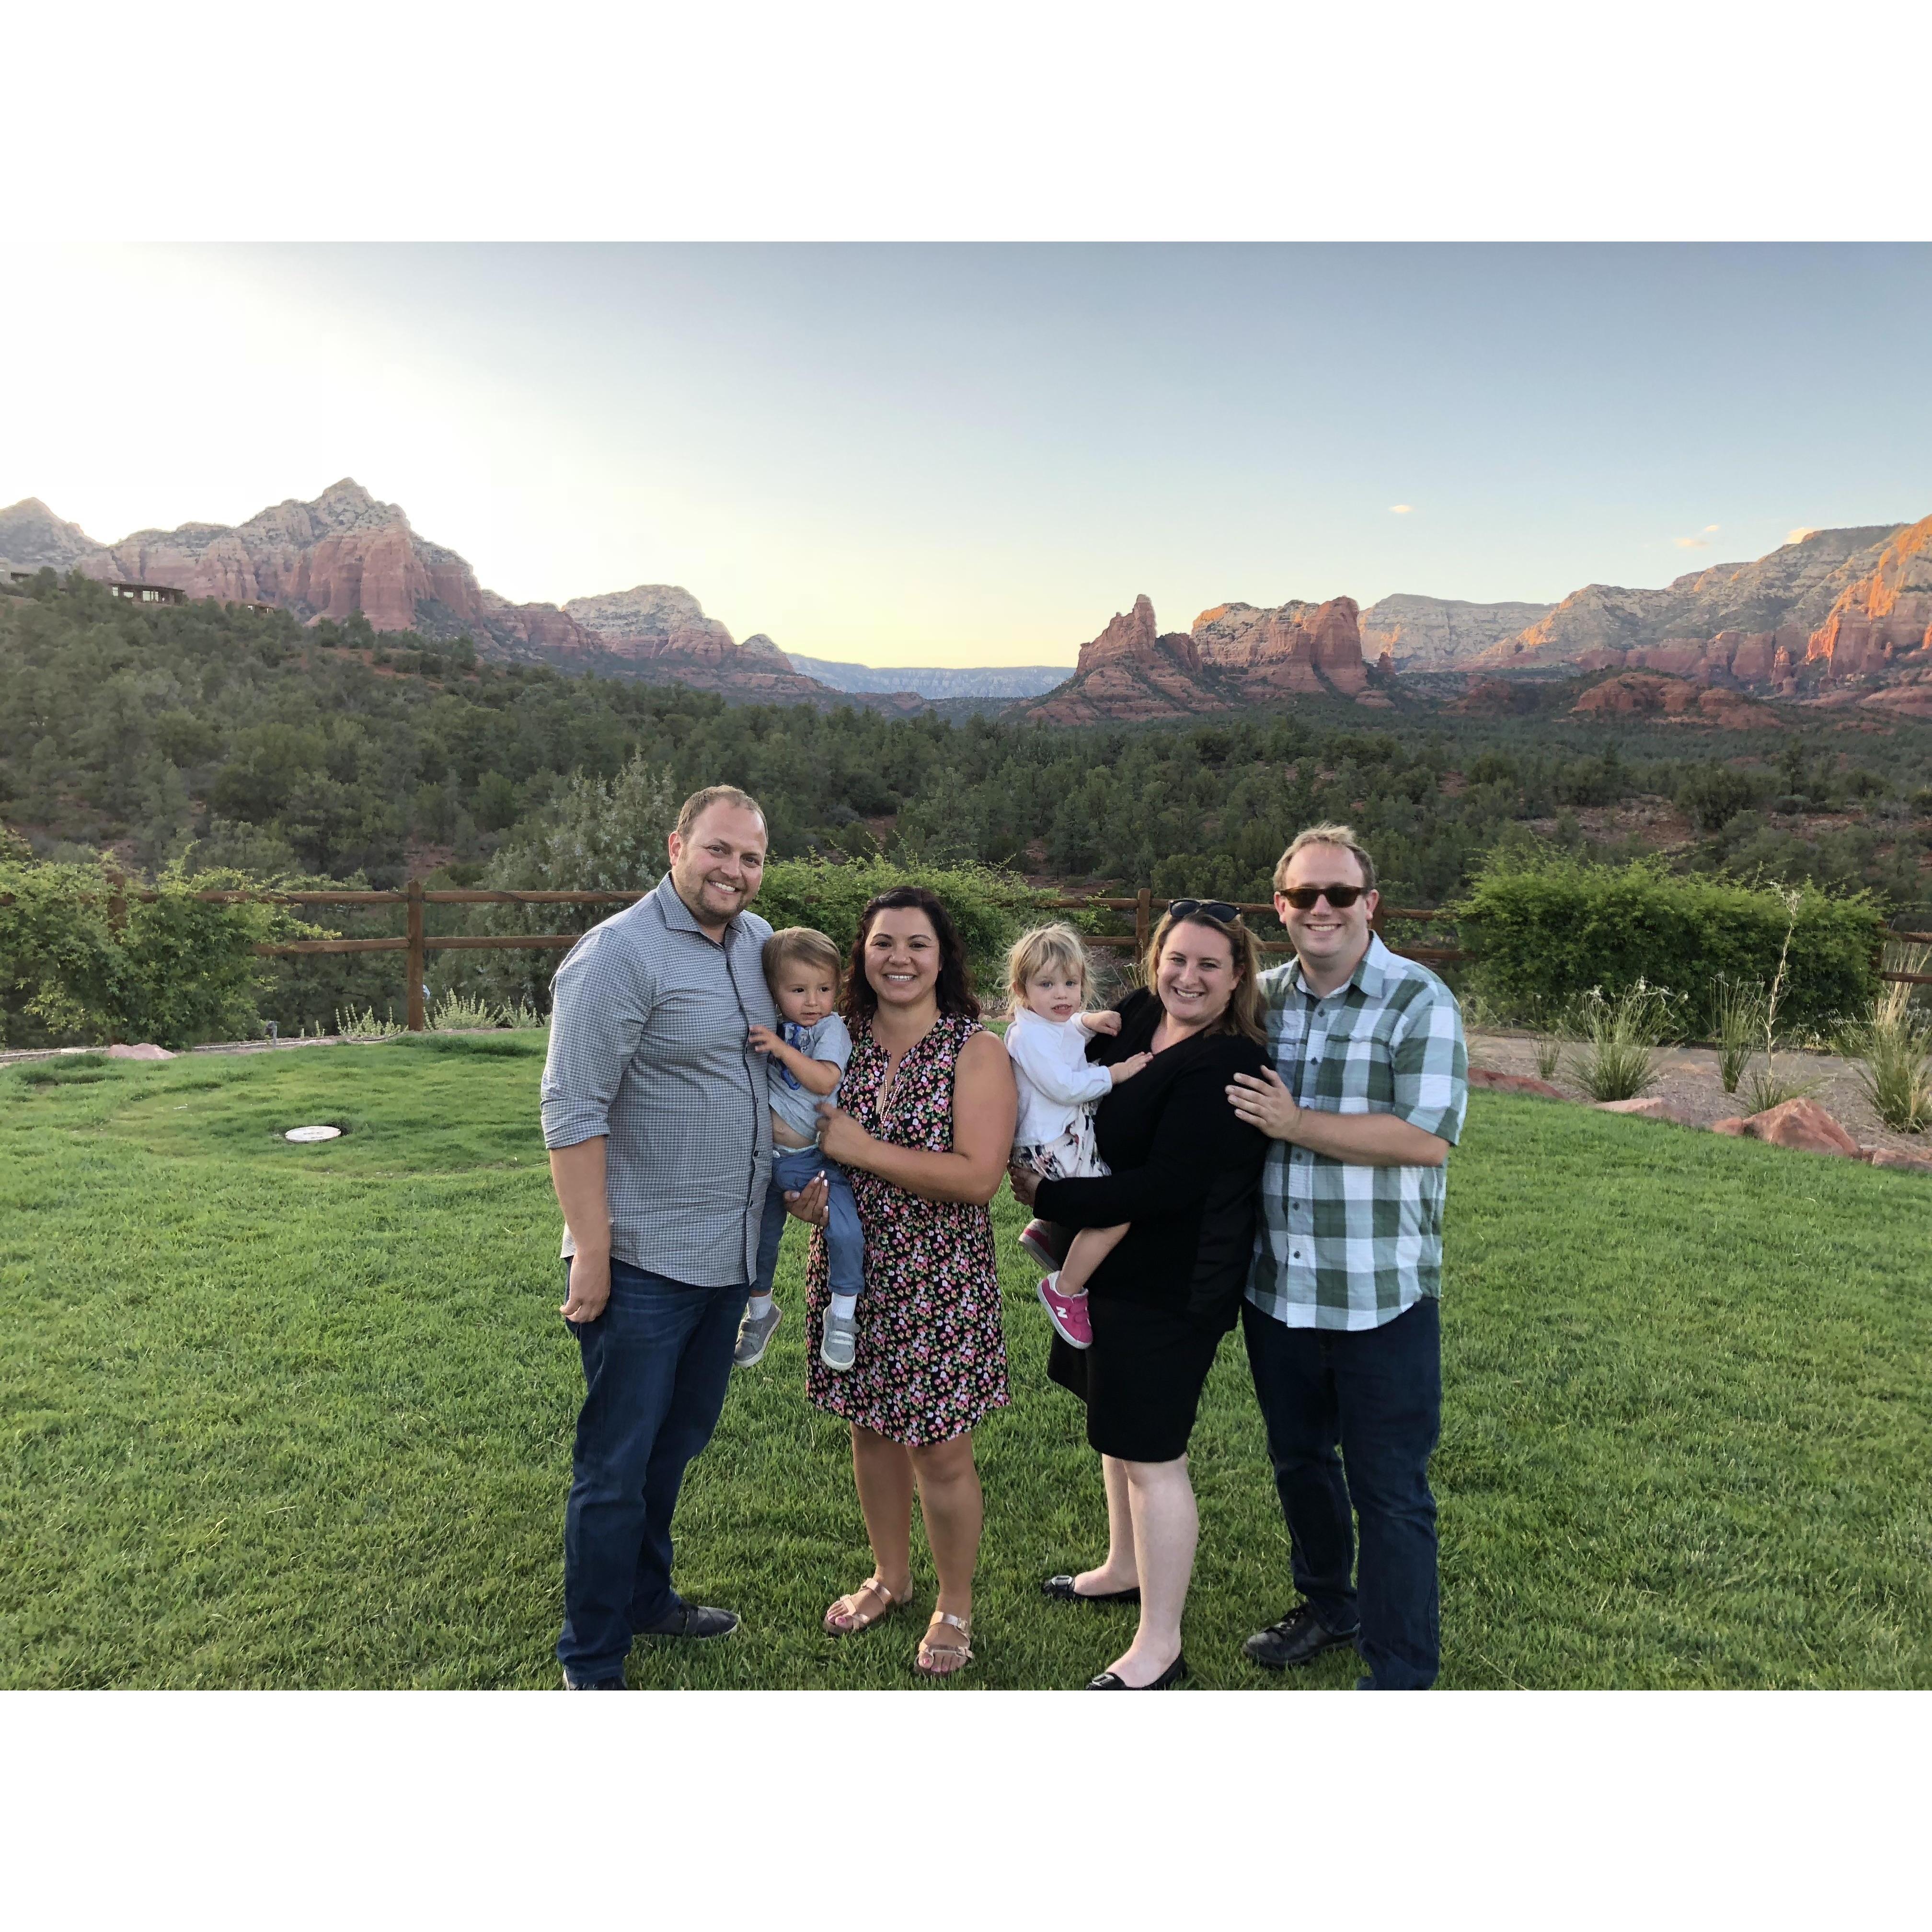 We've always enjoyed Sedona with both friends and family.  Looking forward to having y'all there with us!